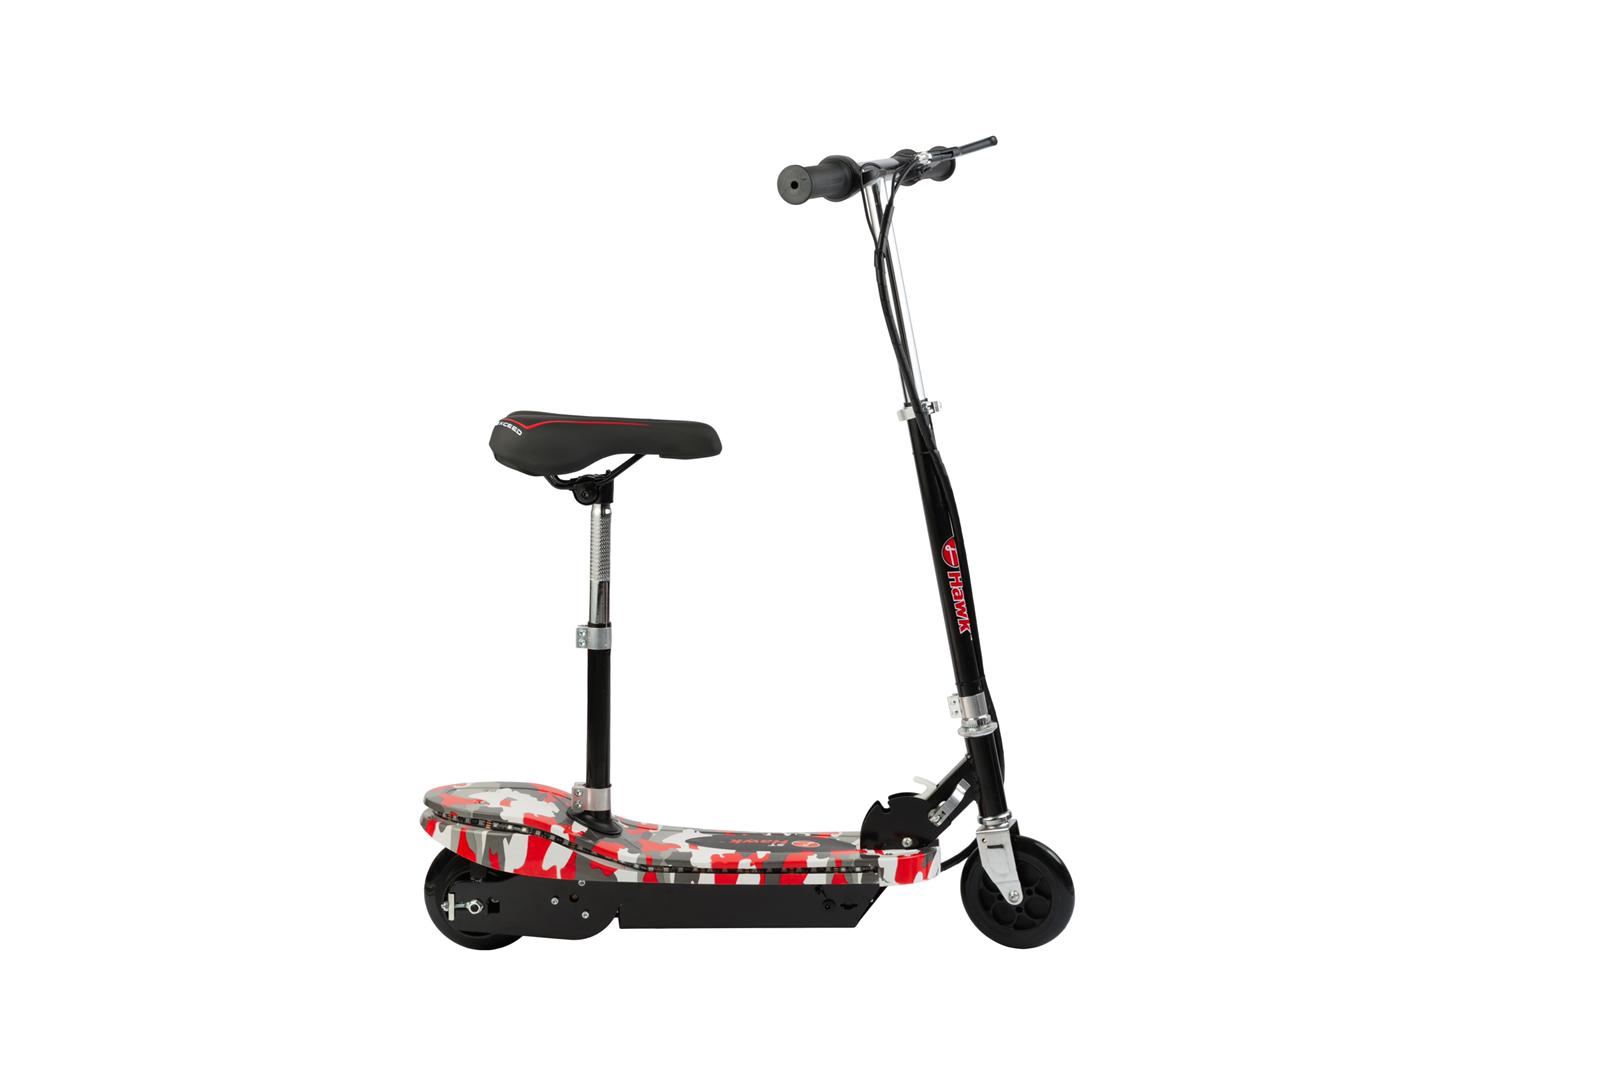 2 in 1 Use Seat or Without Limited Edition E Scooter Rear Brakes with Charger Rechargeable 120w Made of Steel and Aluminium Age 6-12 St Hawk Kids Electric Scooter with Seat Manual 